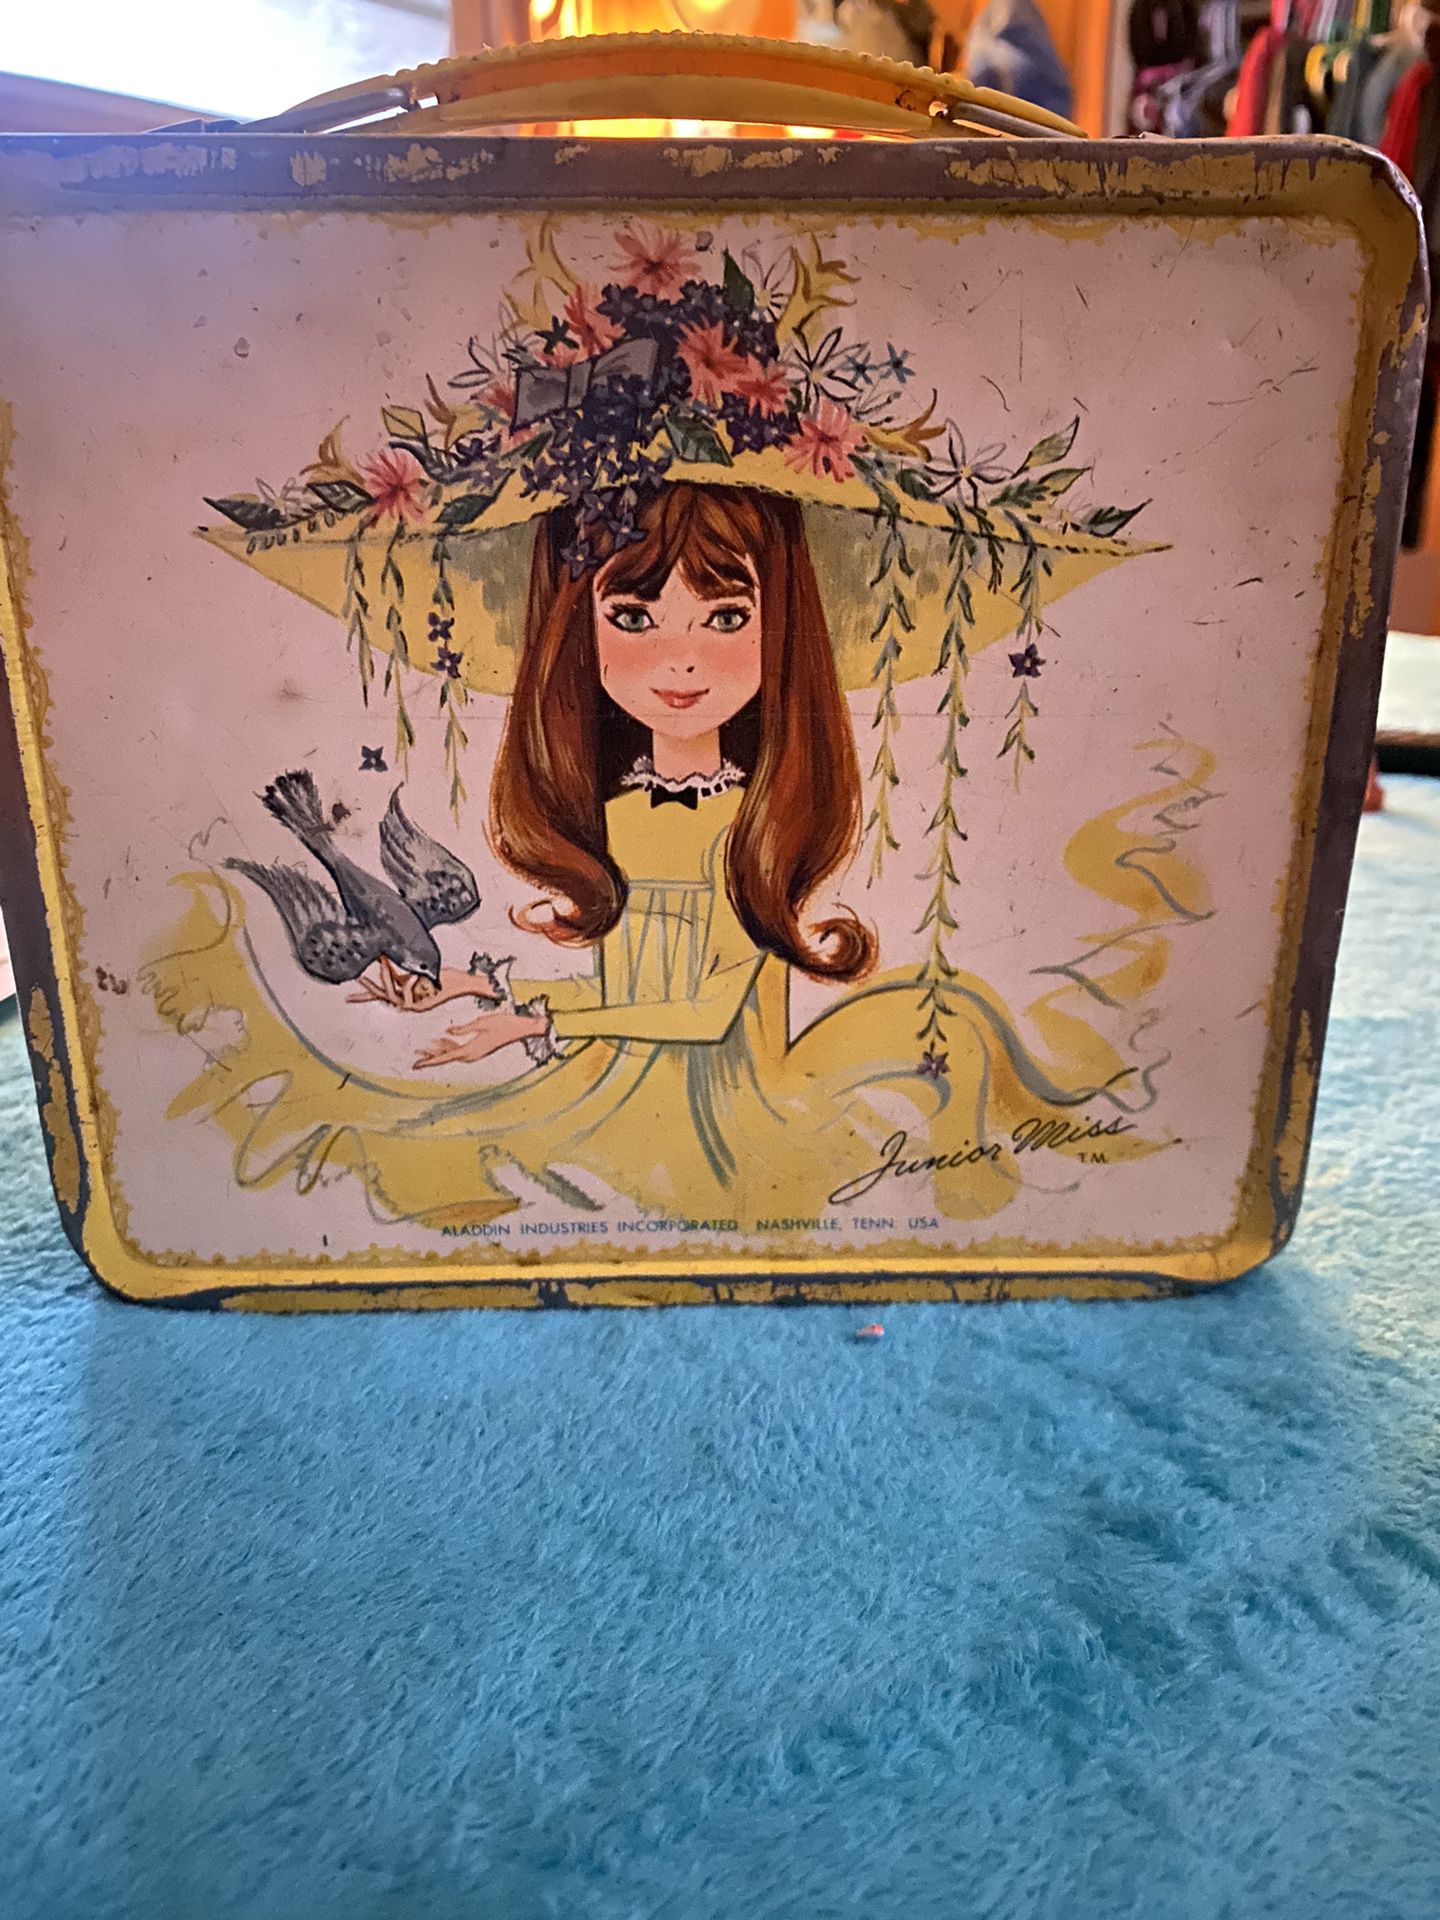 Stanley lunch box for Sale in Union City, CA - OfferUp